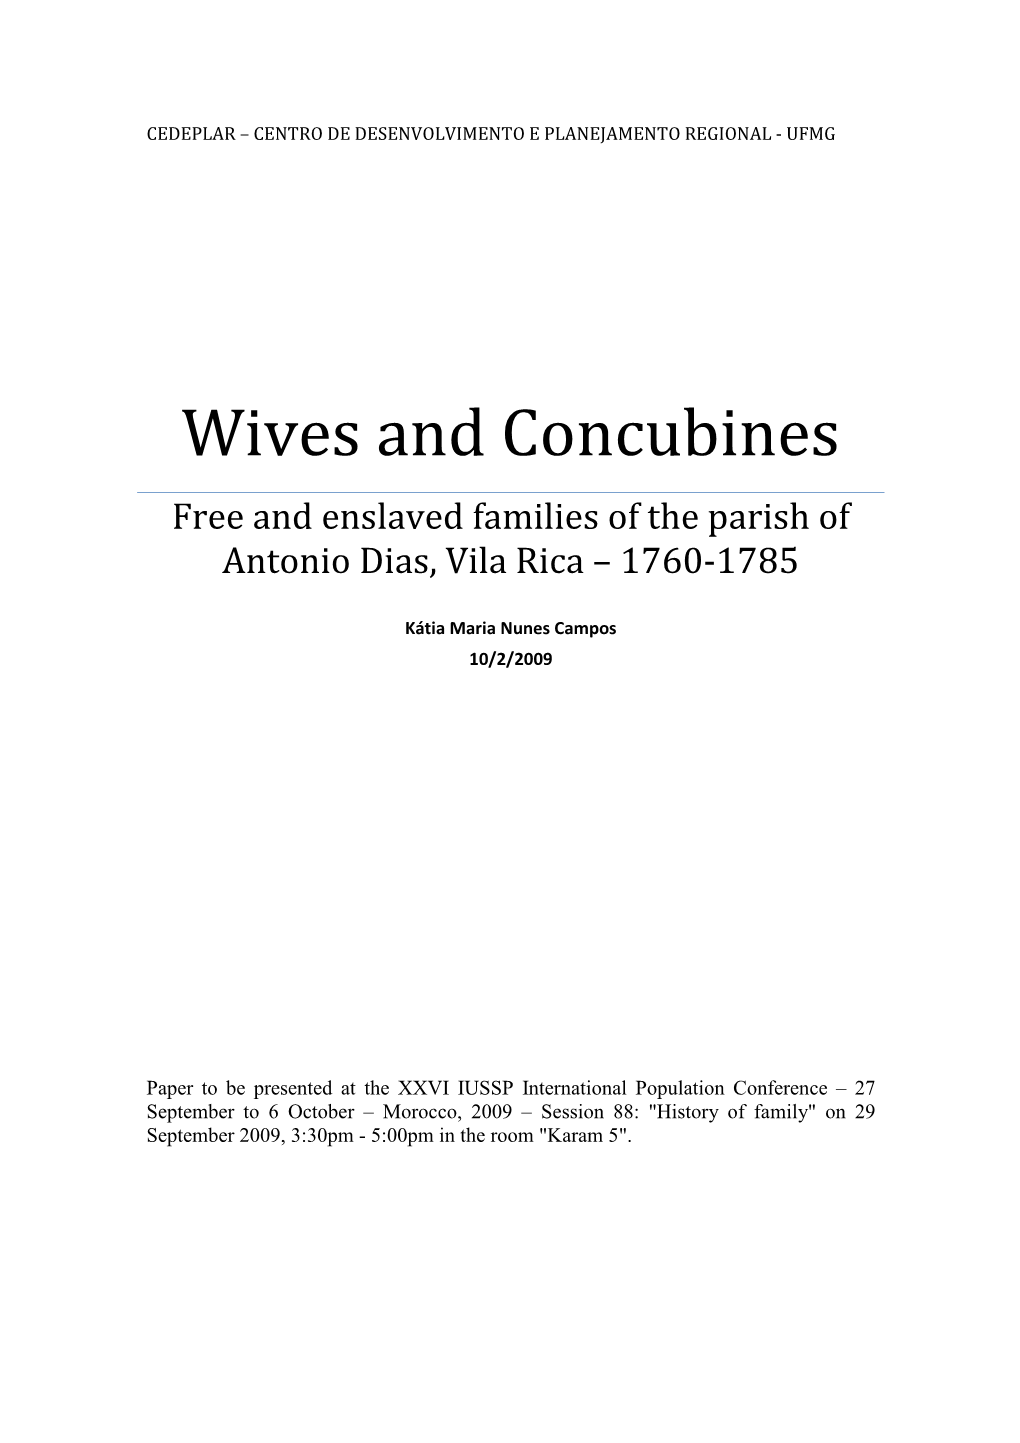 Wives and Concubines Free and Enslaved Families of the Parish of Antonio Dias, Vila Rica – 1760-1785